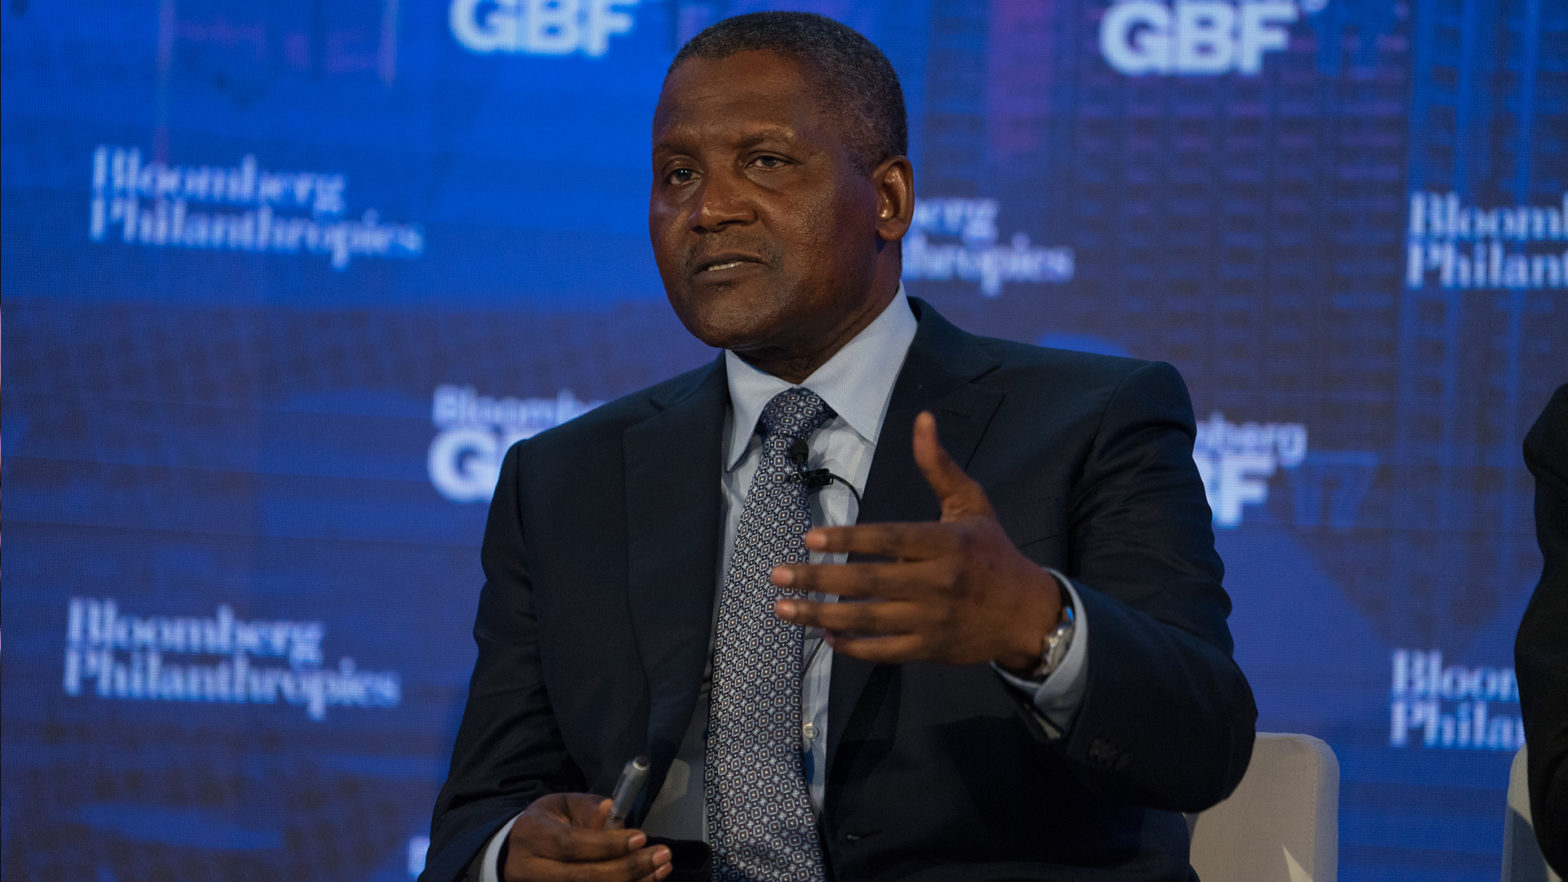 Everything We Know About Aliko Dangote, The 'World's Richest Black Man' Worth $14B